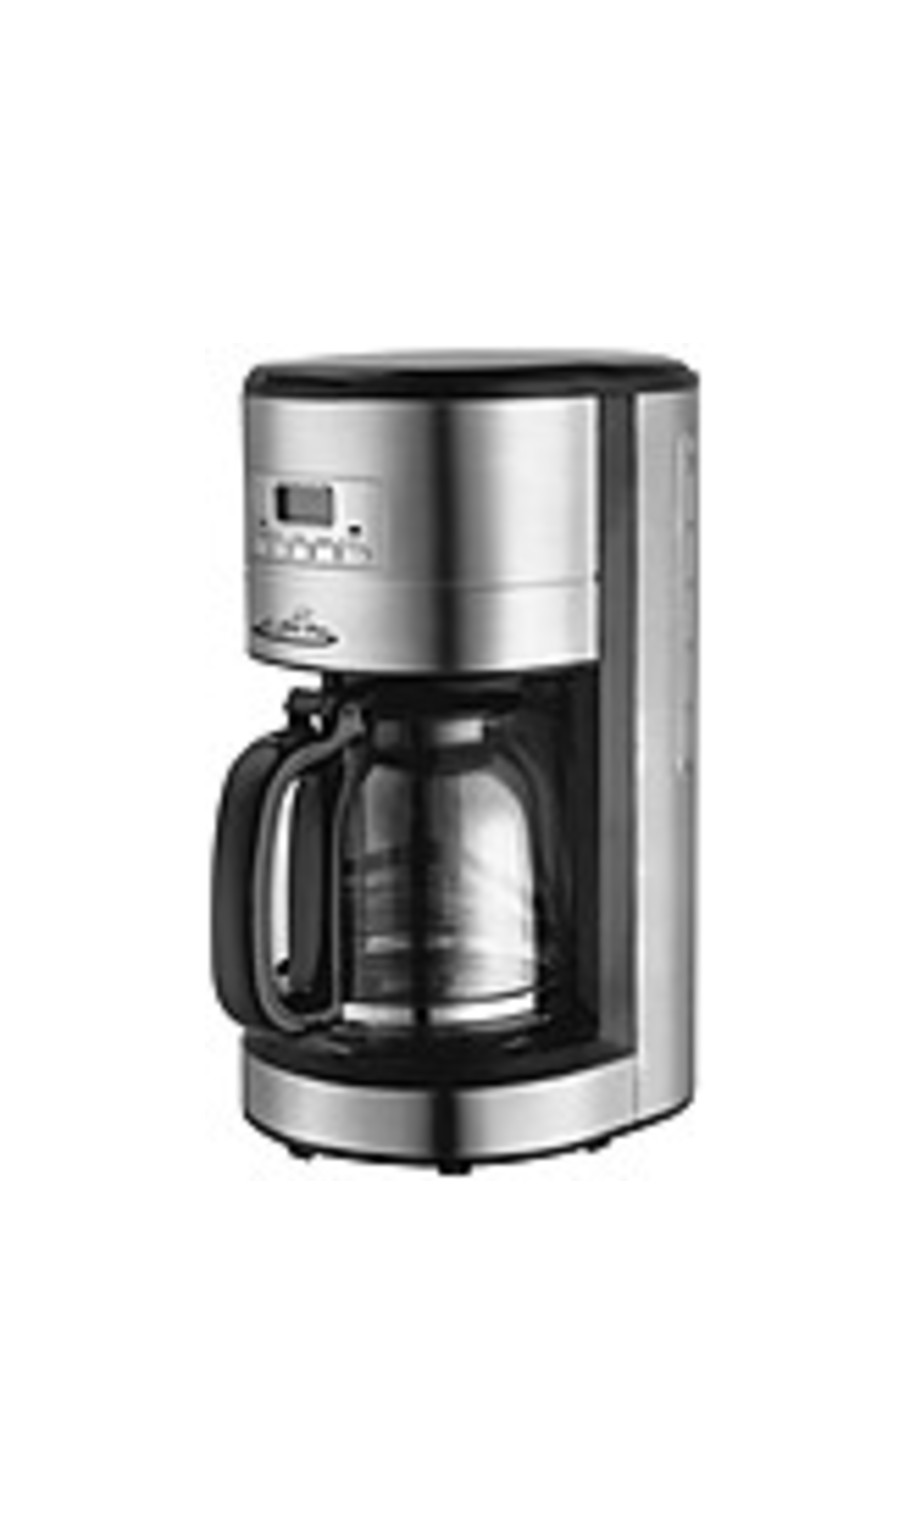 Coffee Pro CPCM4276 10-12 Cup Drip Stainless Steel Coffee Maker